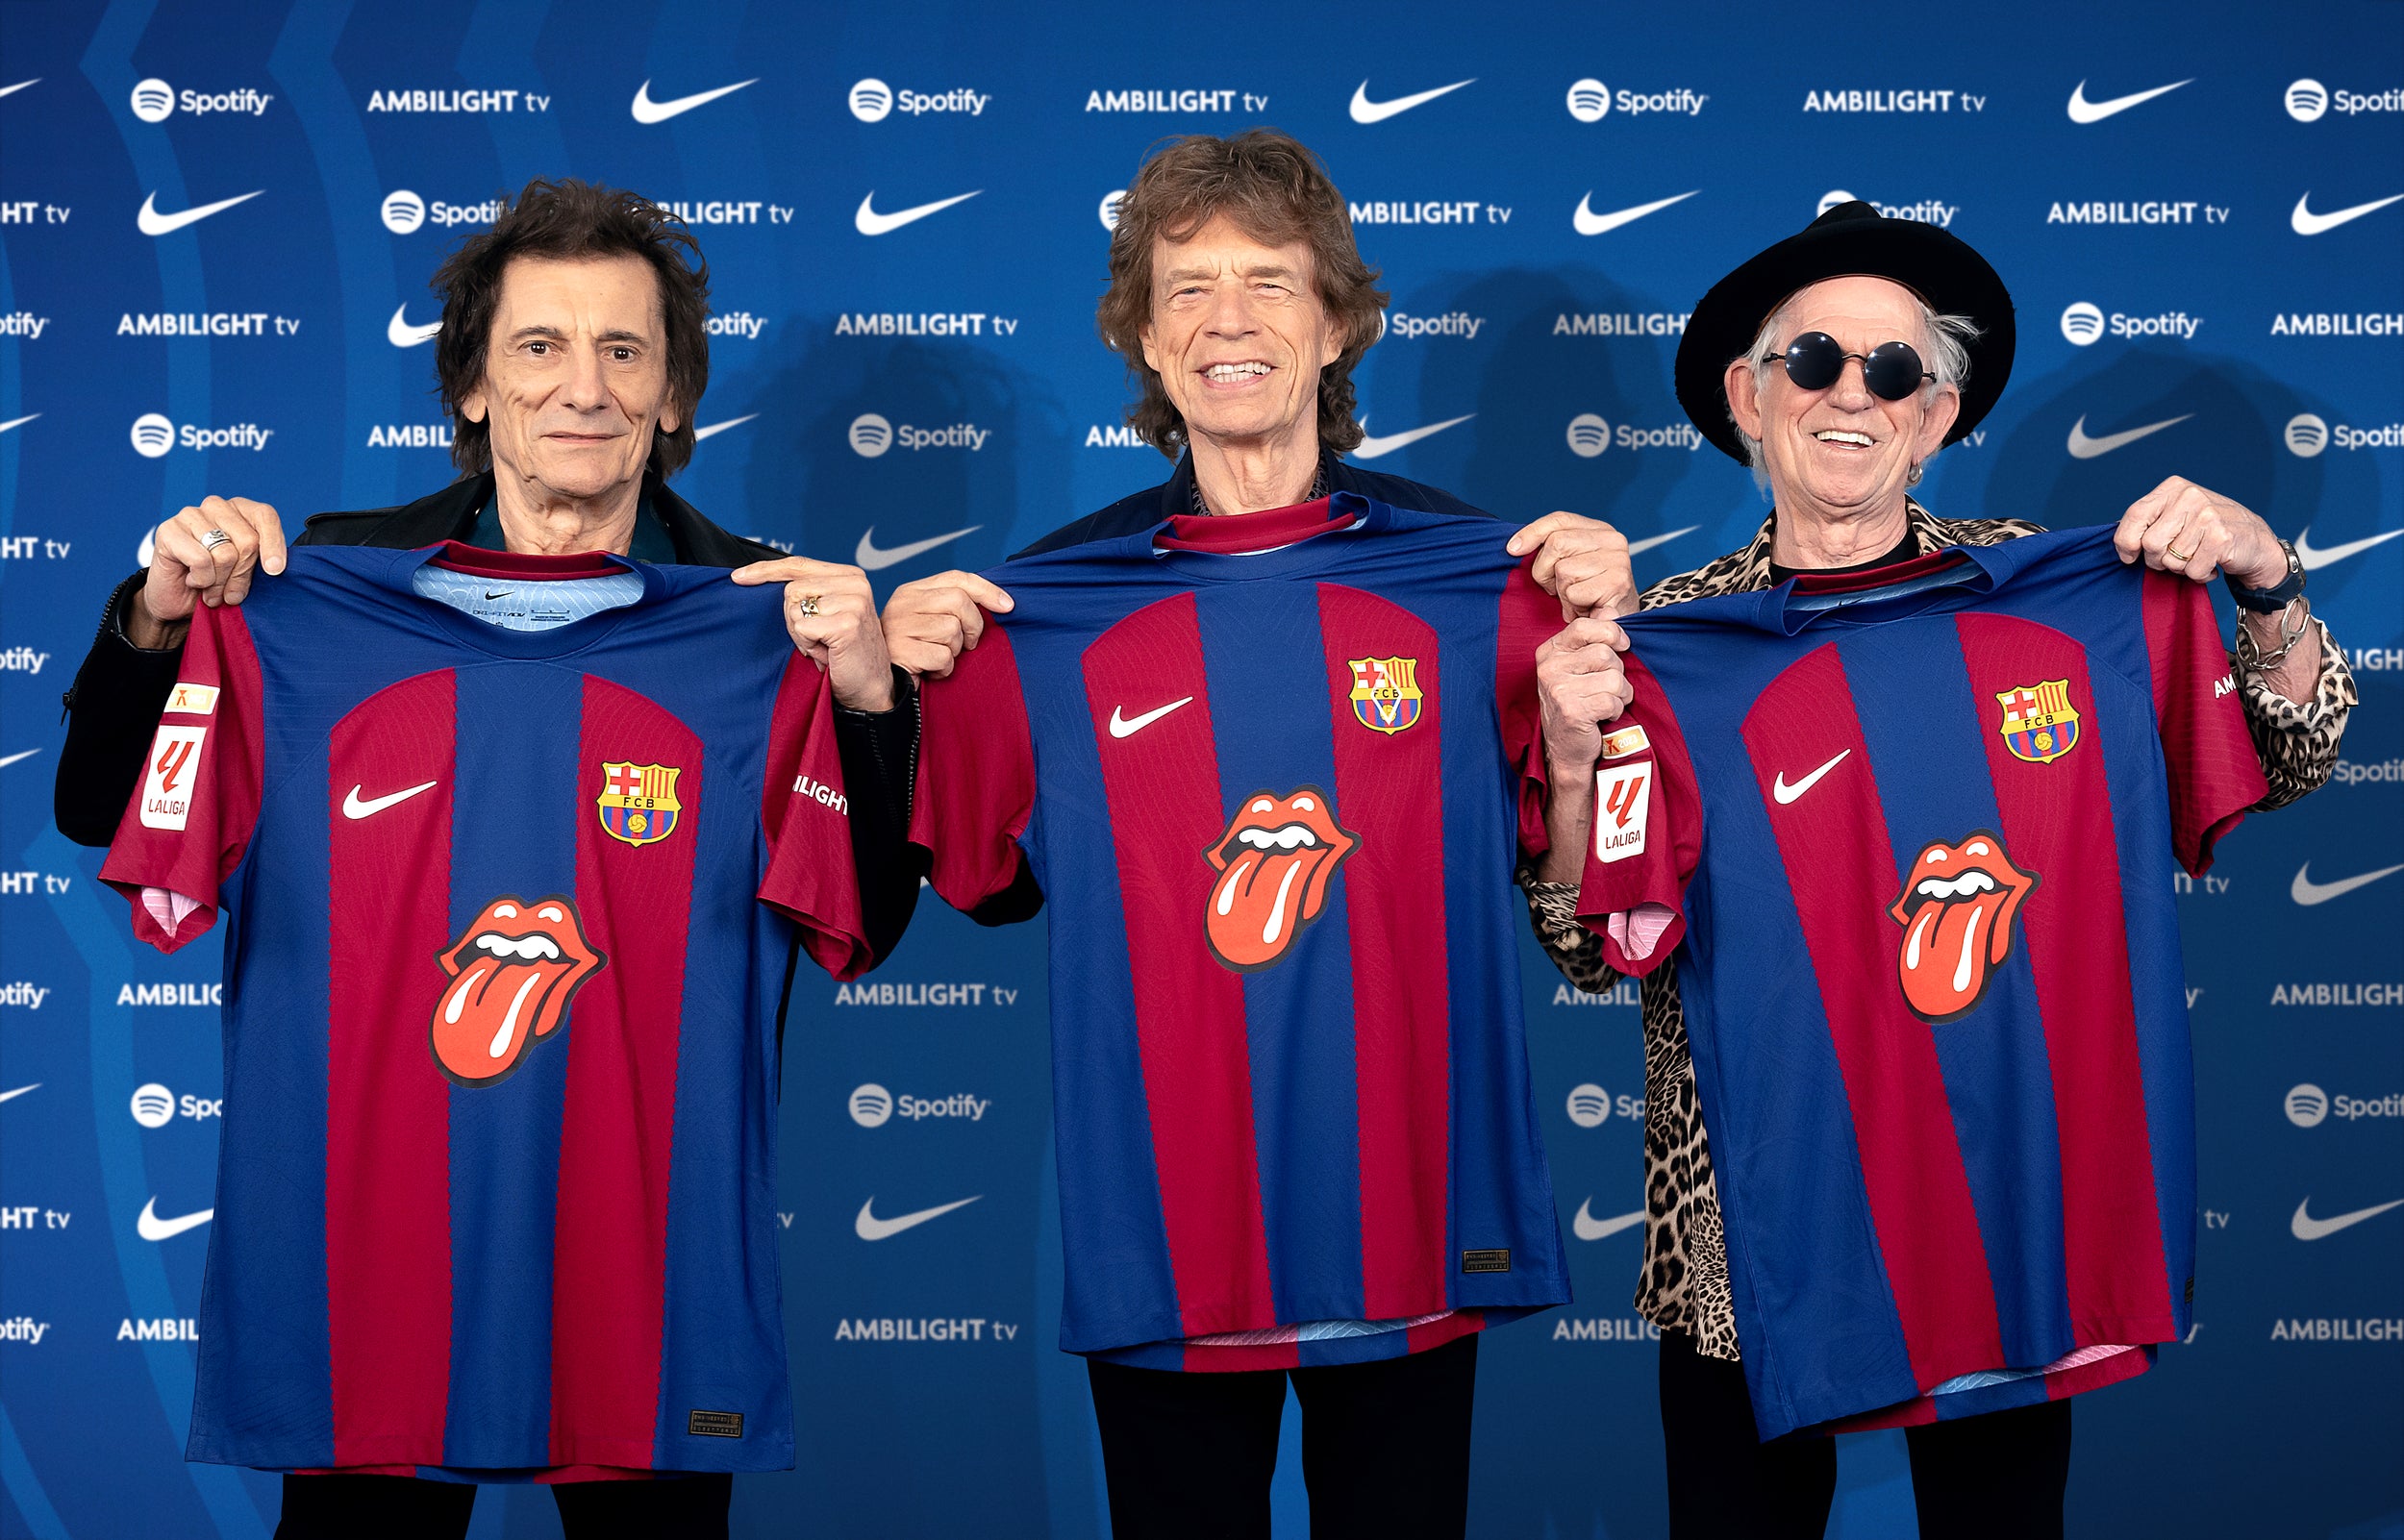 Limited edition Rolling Stones x FC Barcelona